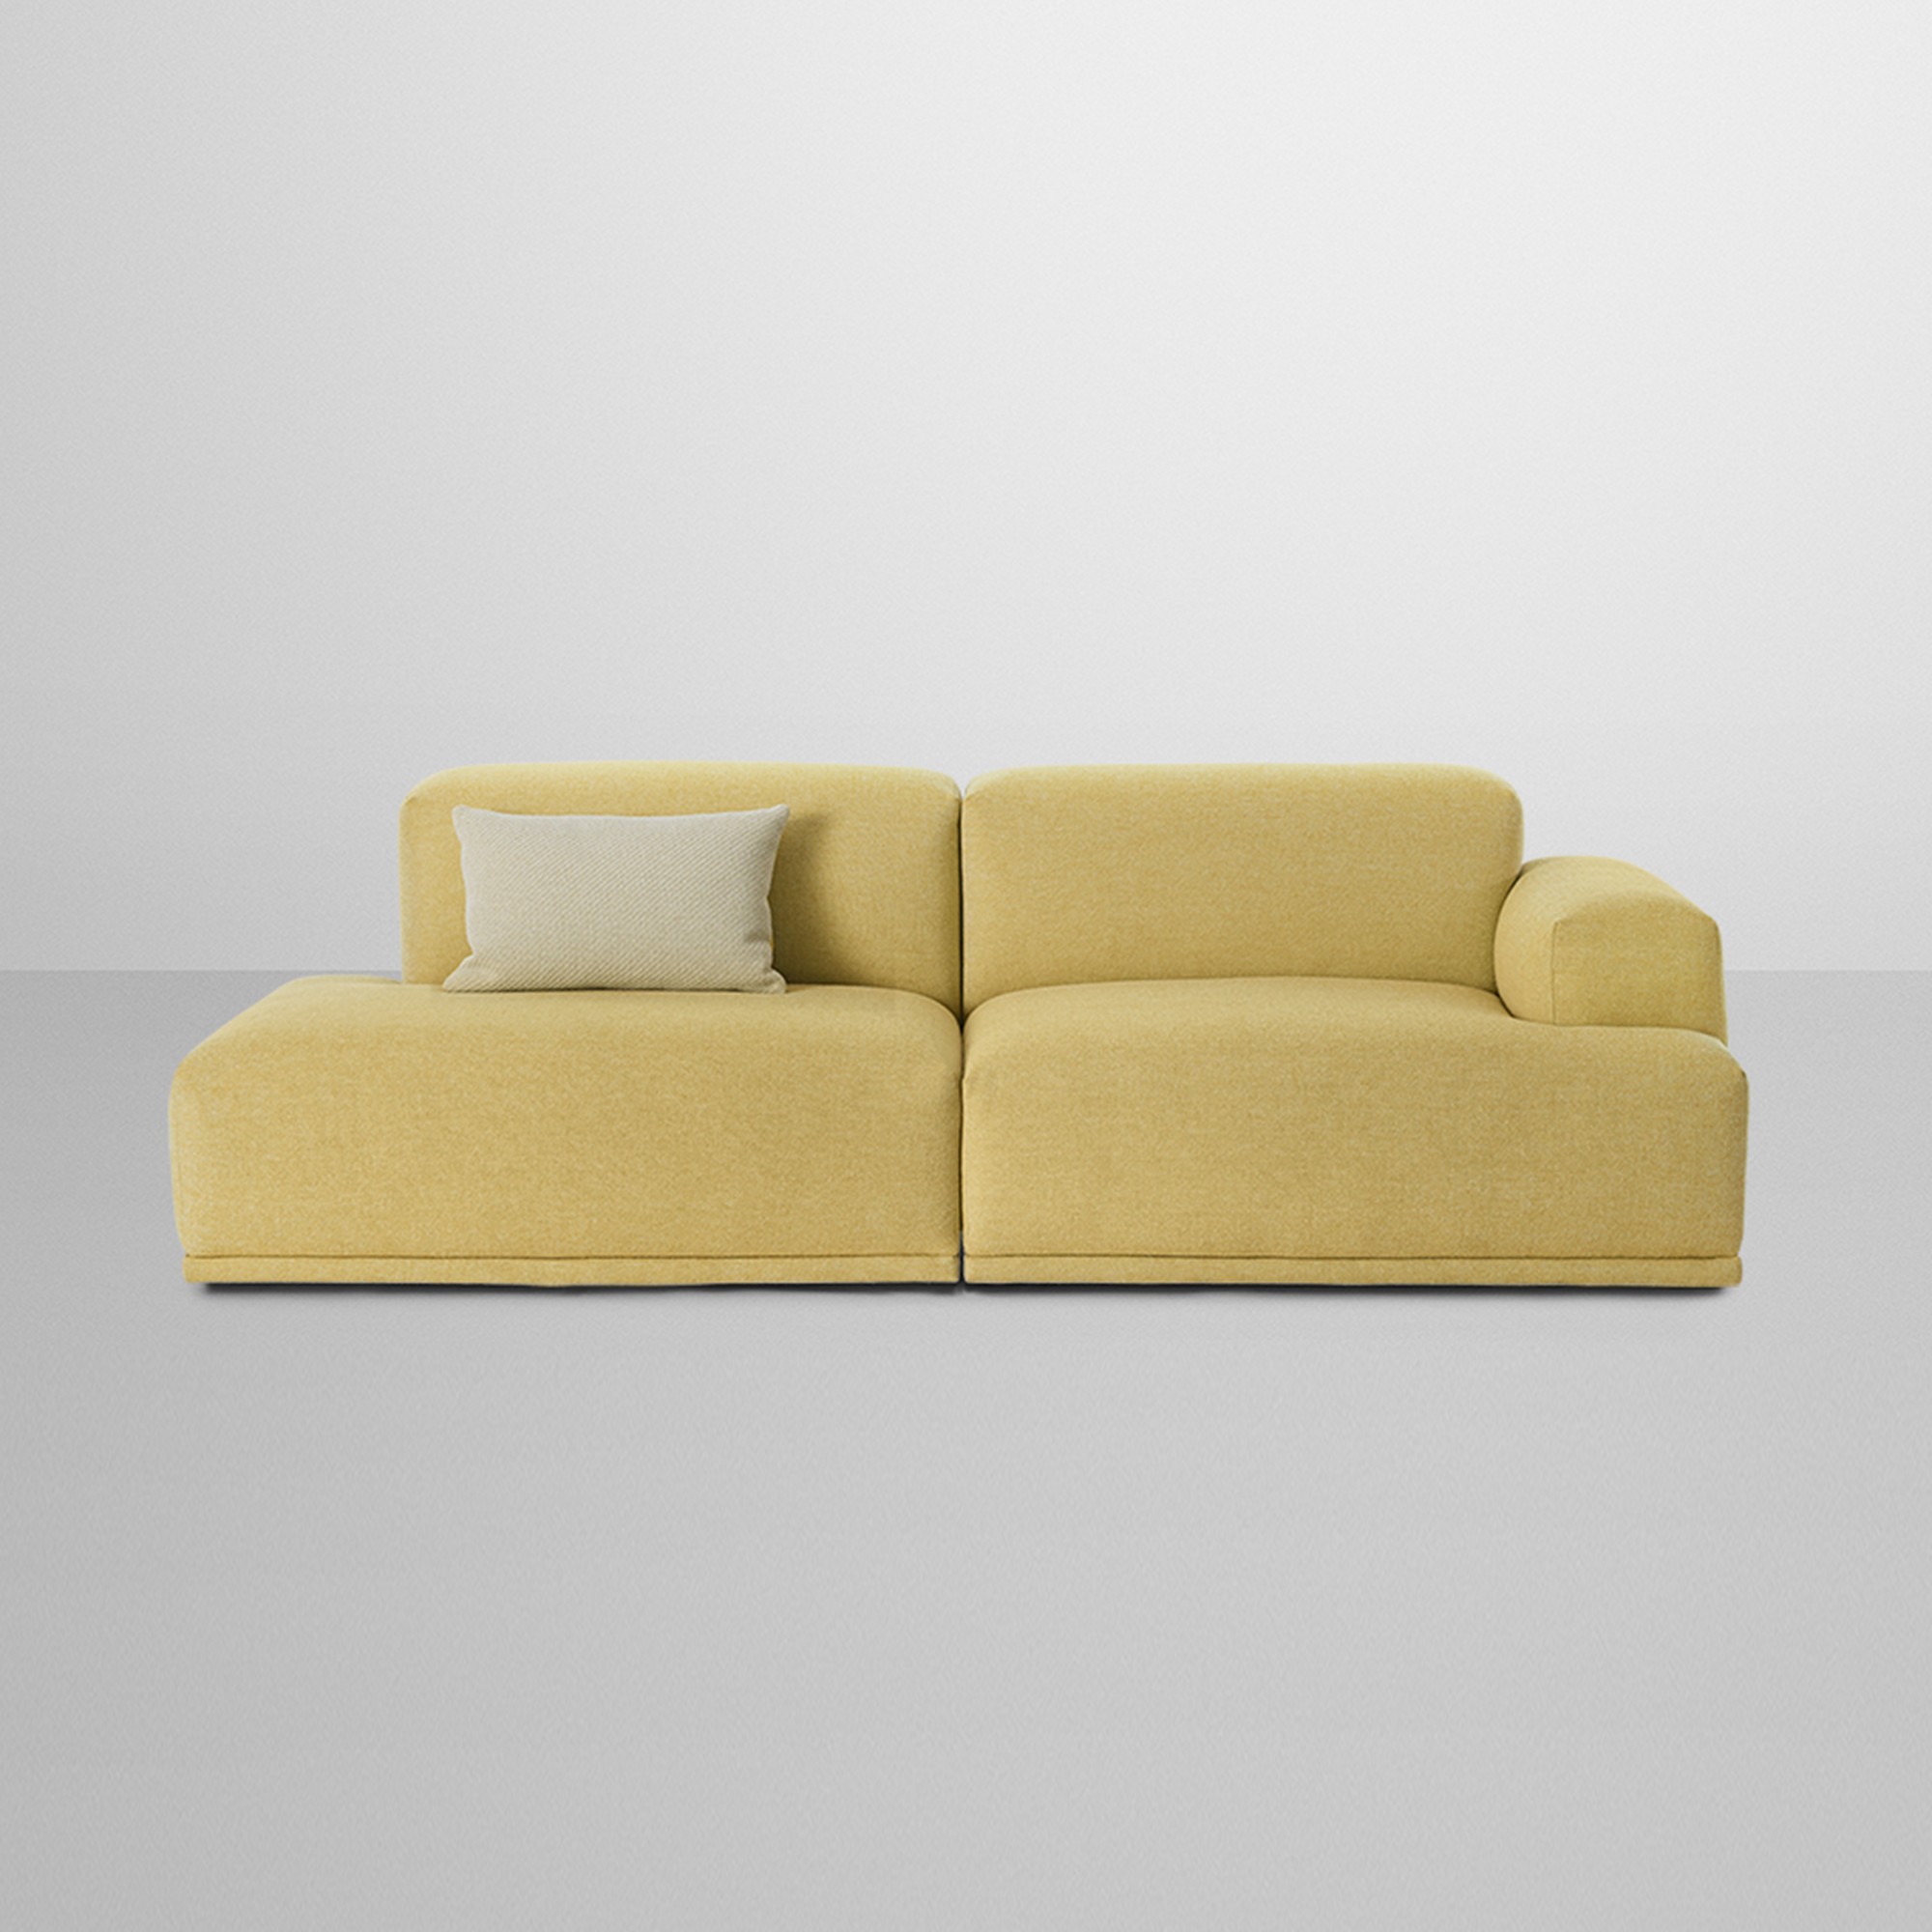 The Modular 2 Seaters Sofa Connect By, How Do Modular Sofas Connect